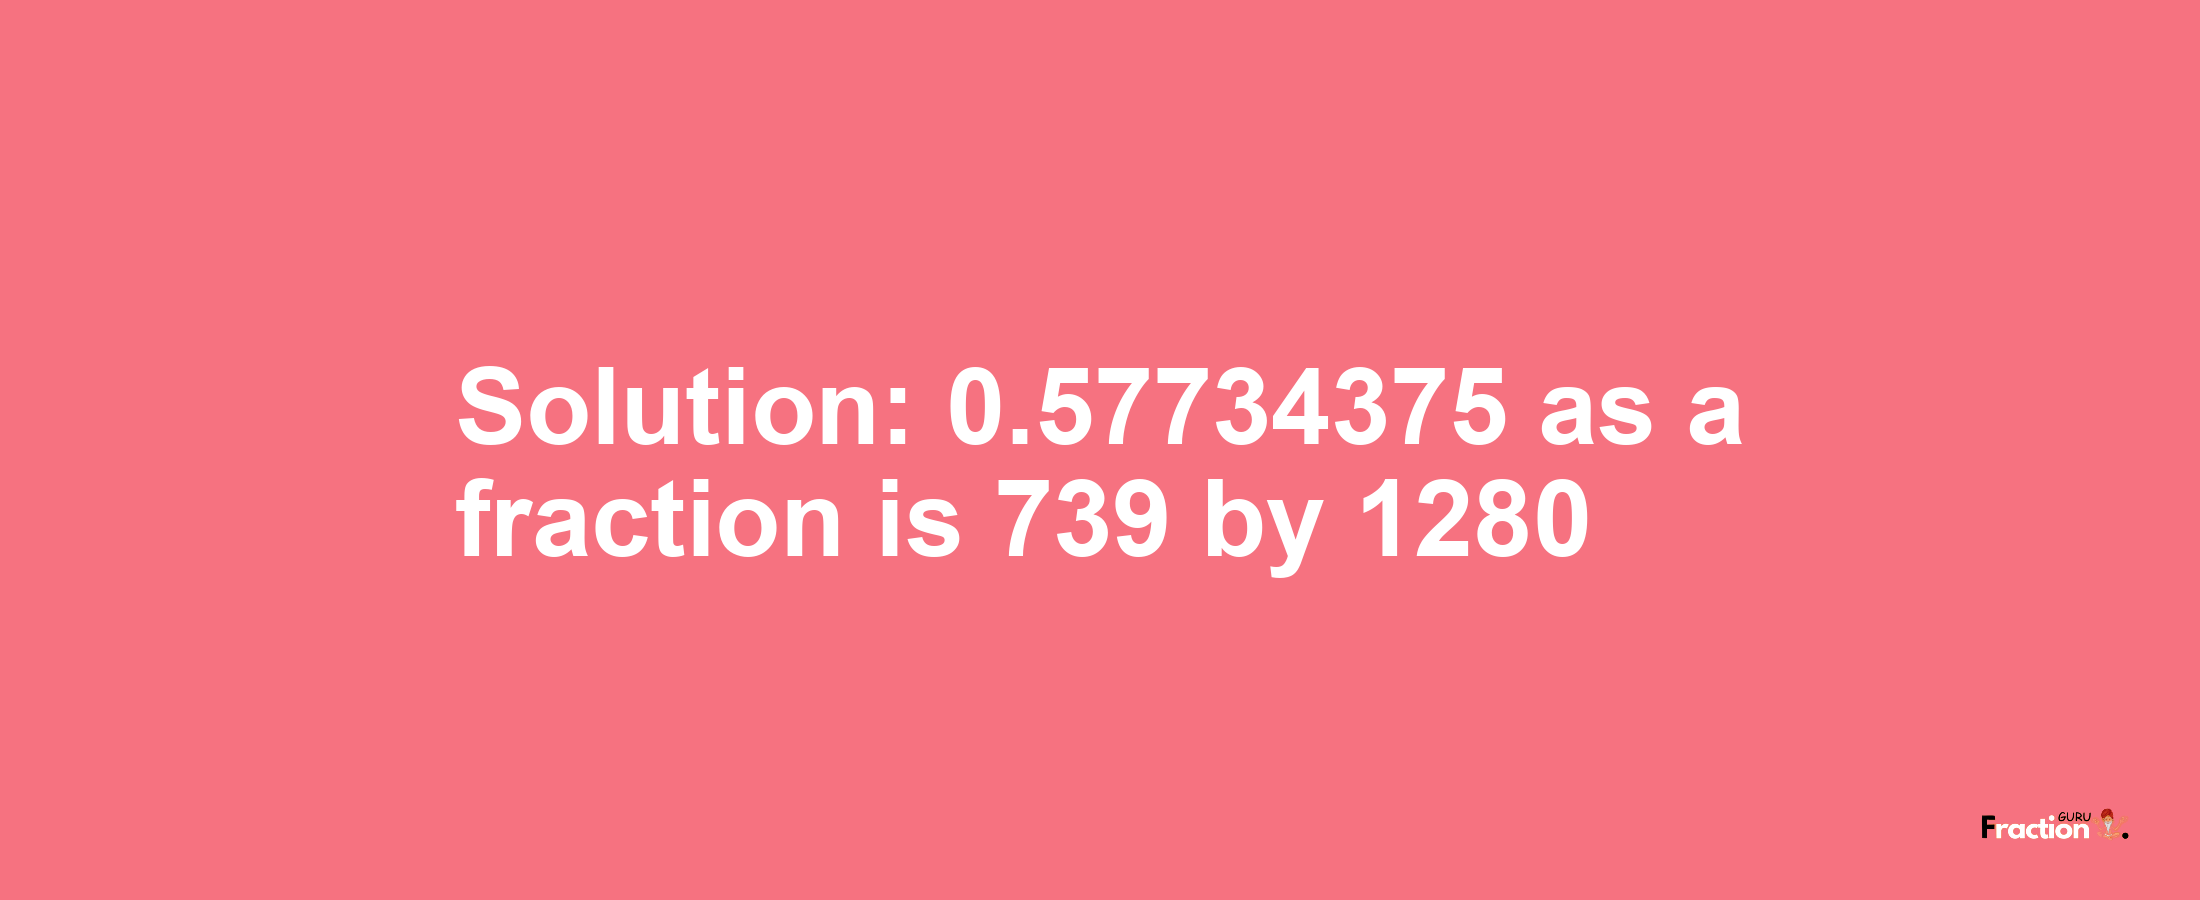 Solution:0.57734375 as a fraction is 739/1280